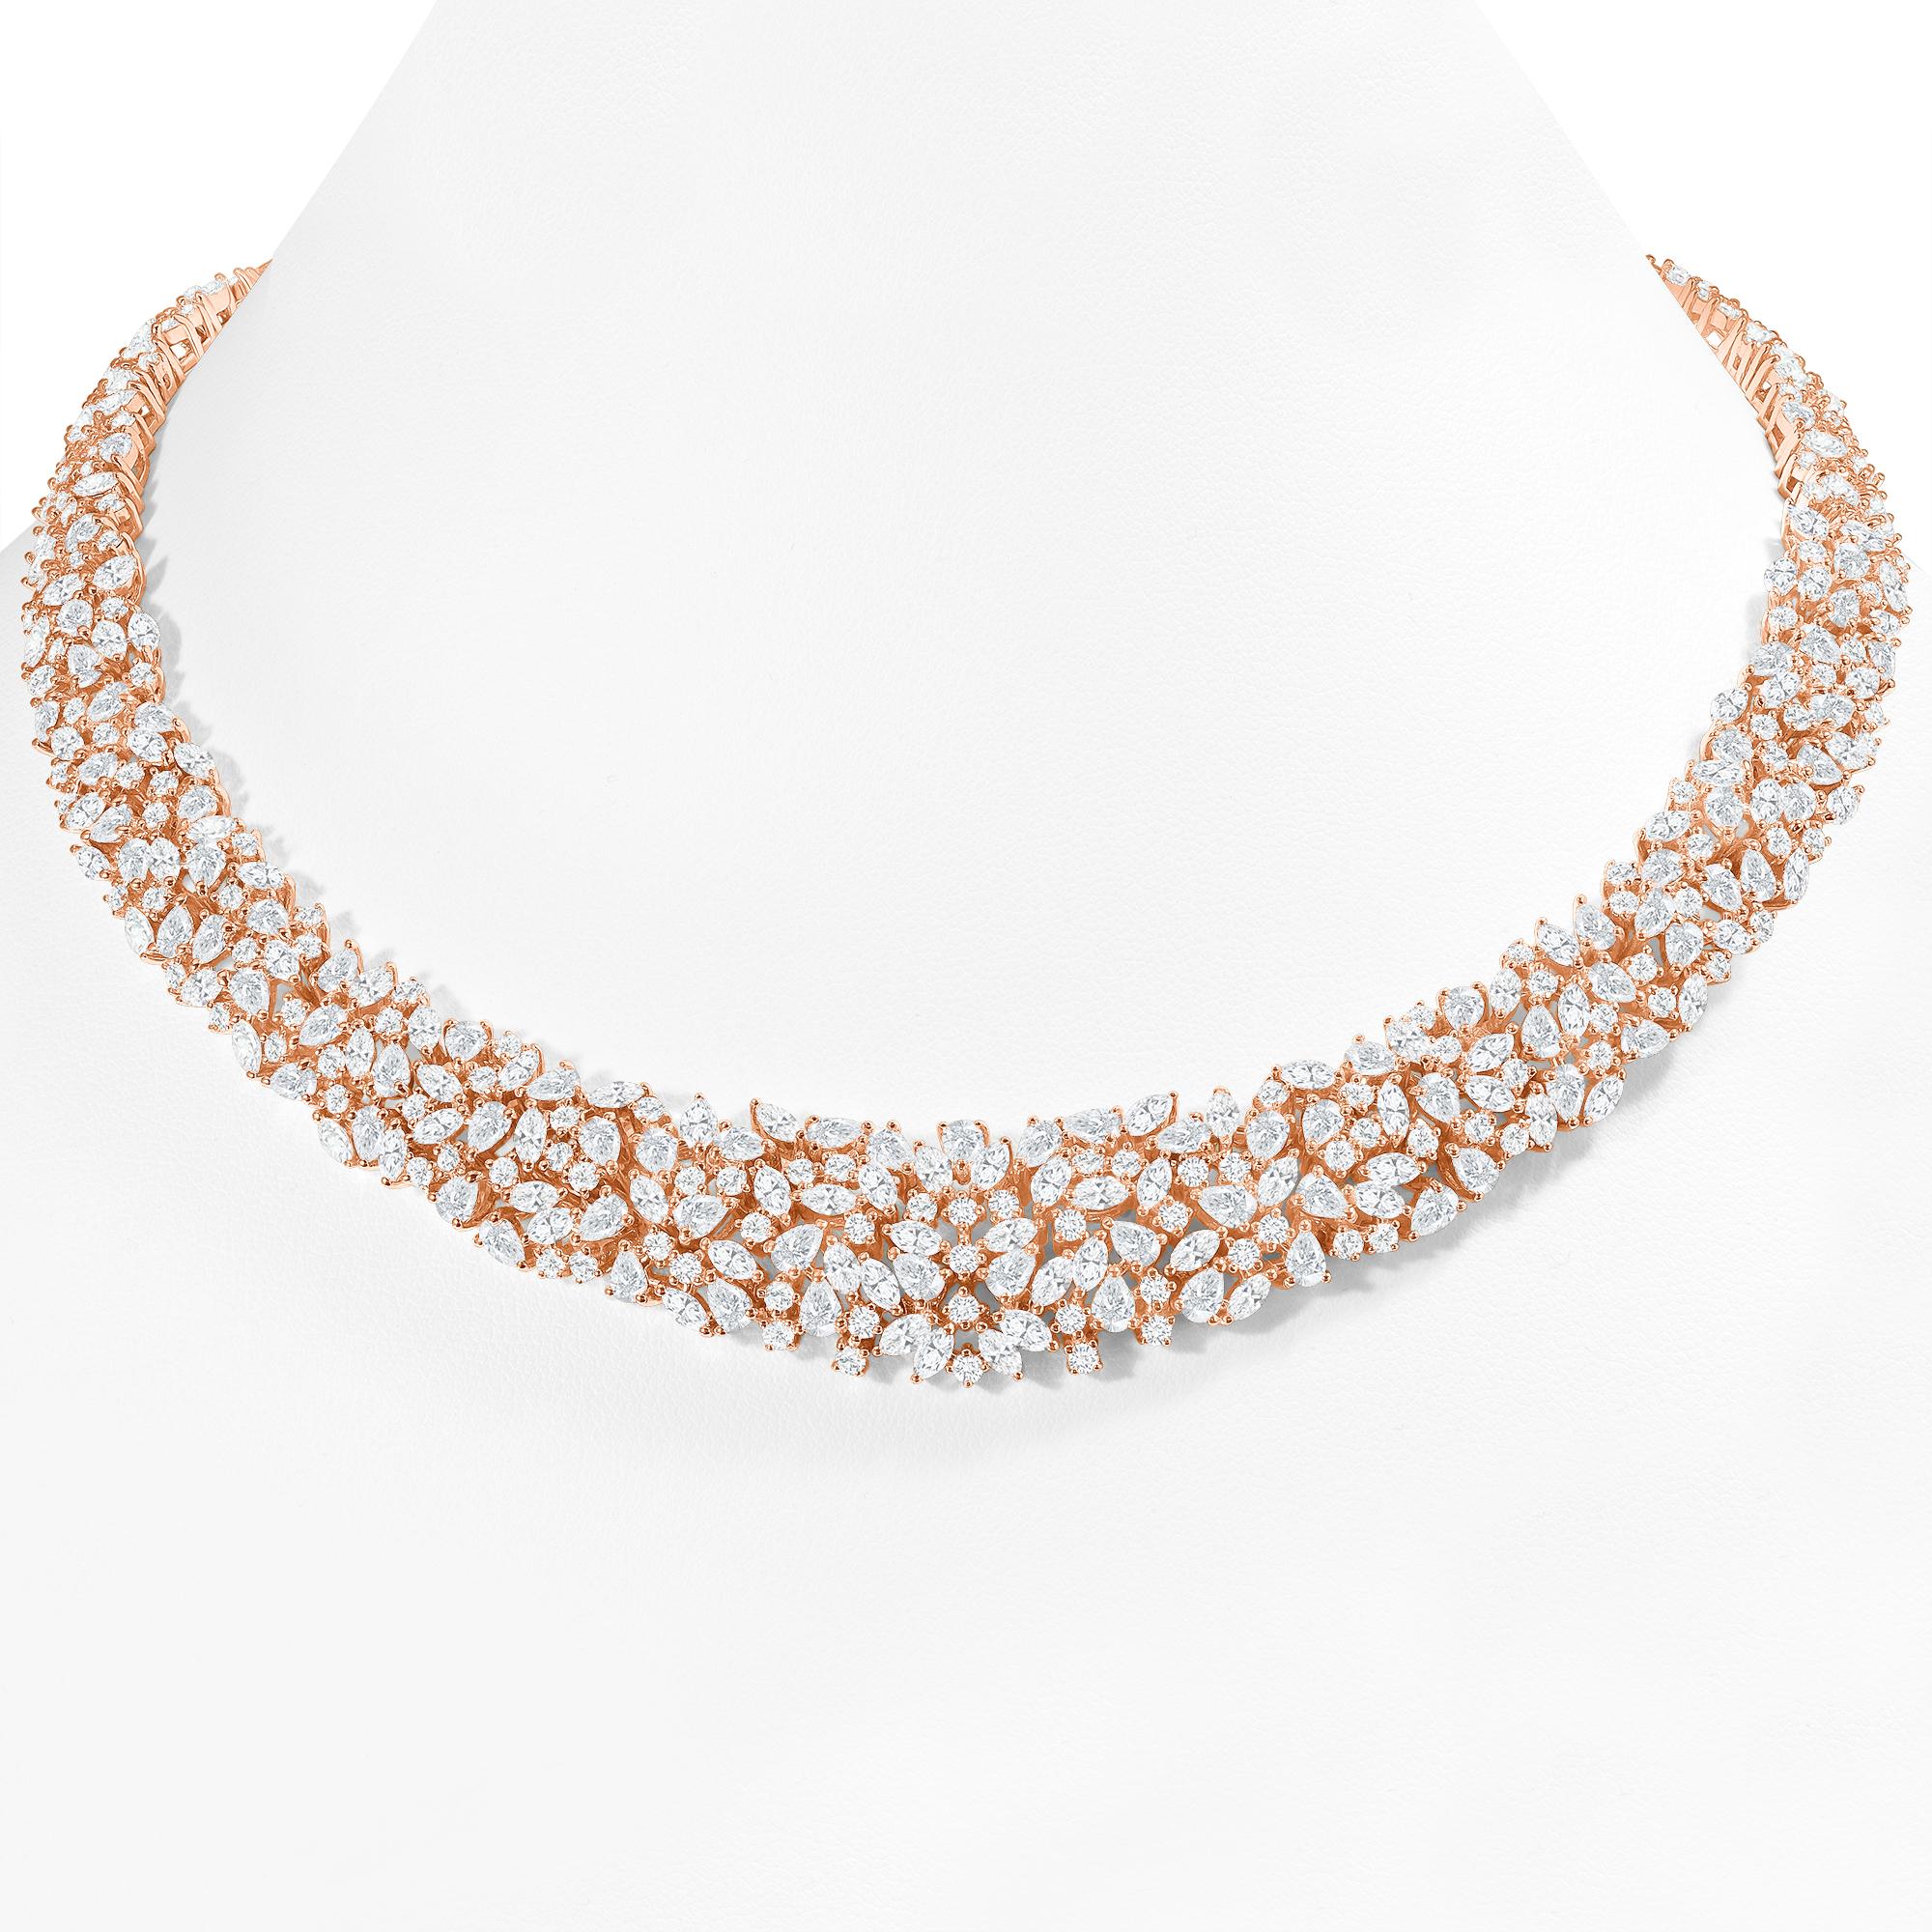 30 Carat Diamond Cluster Necklace, 18K Rose Gold In New Condition For Sale In Los Angeles, CA